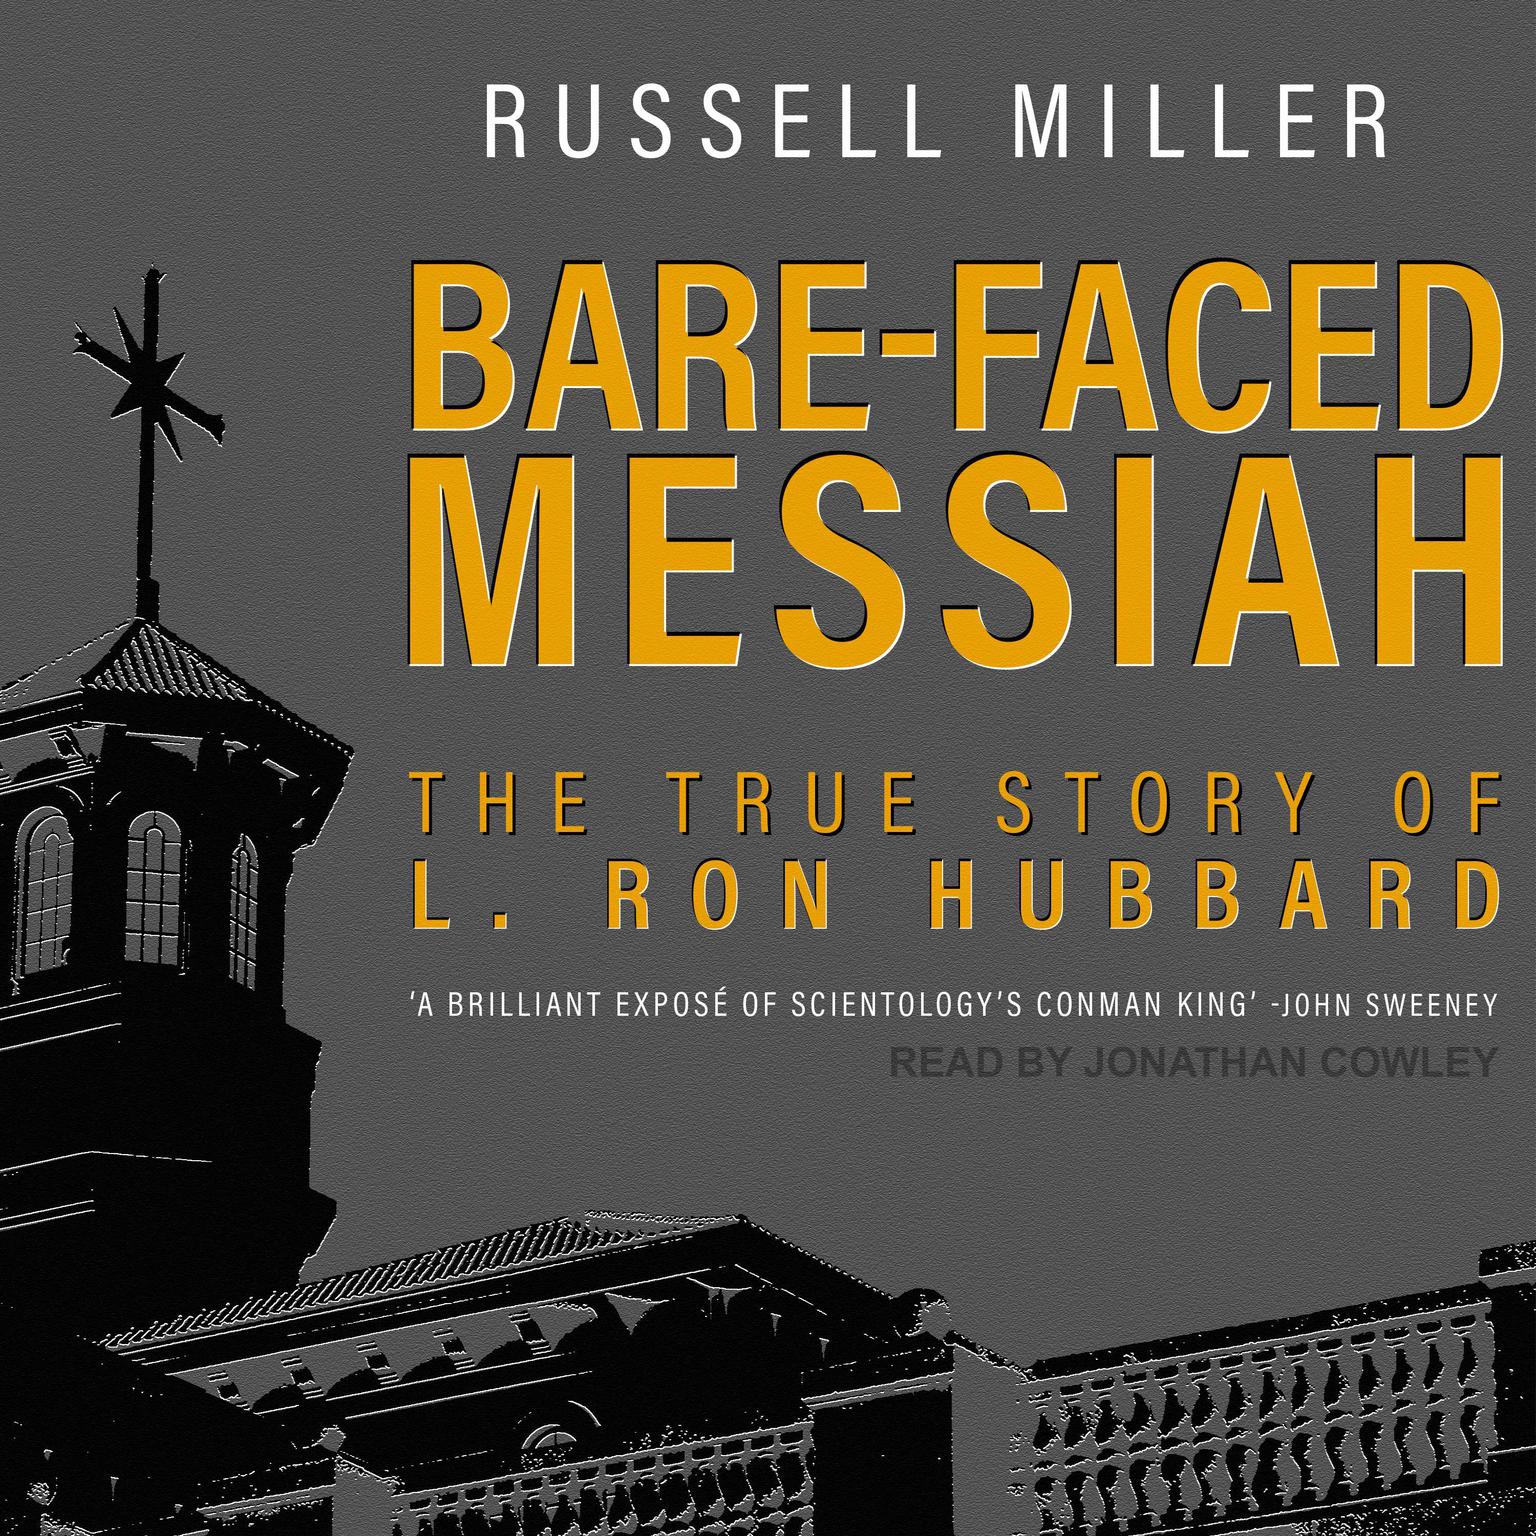 Bare-Faced Messiah: The True Story of L. Ron Hubbard Audiobook, by Russell Miller